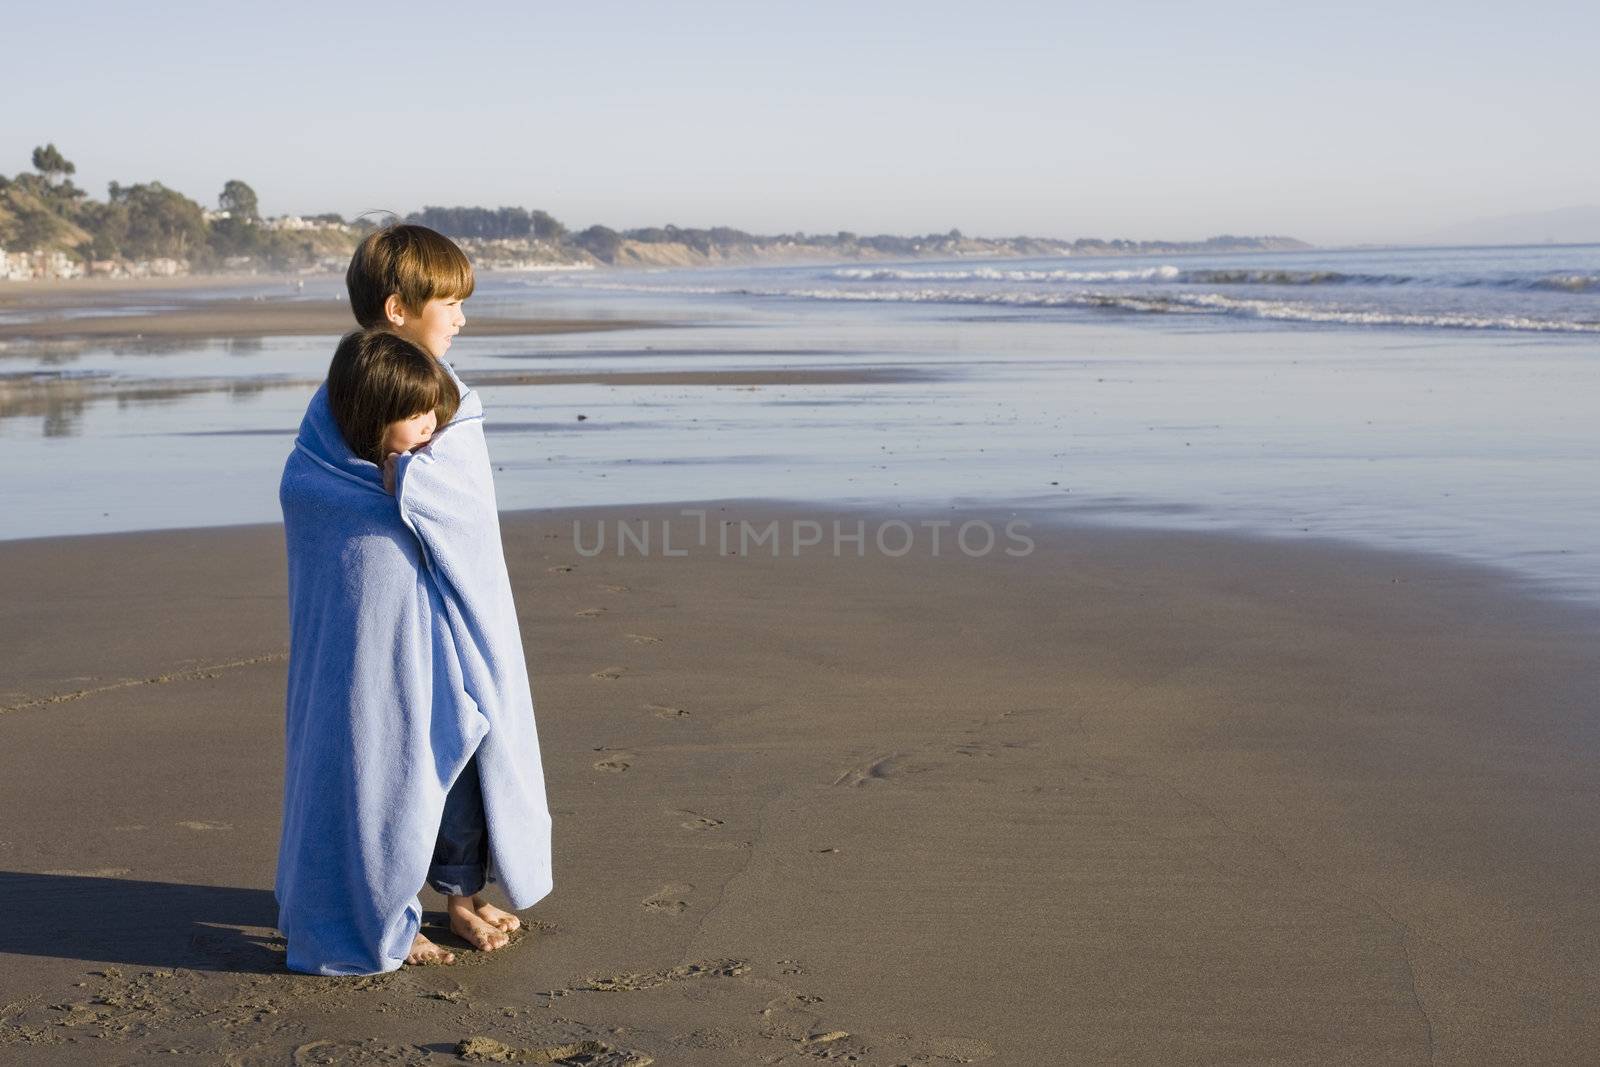 Two Little Kids Standing at Beach Wrapped in a Blanket Looking out to Sea